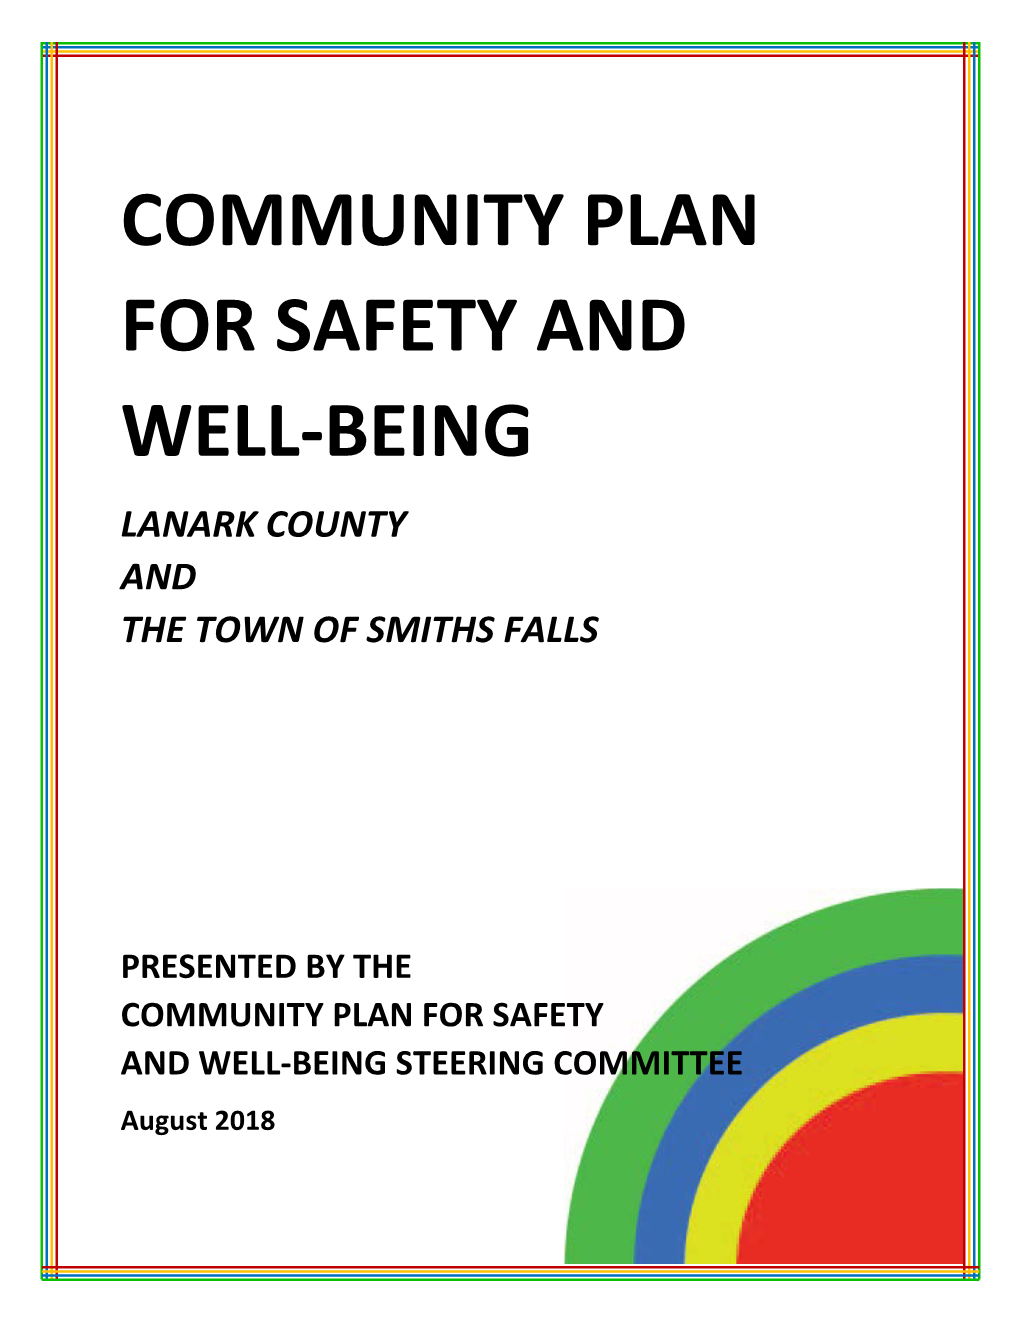 Community Plan for Safety and Well-Being Lanark County and the Town of Smiths Falls